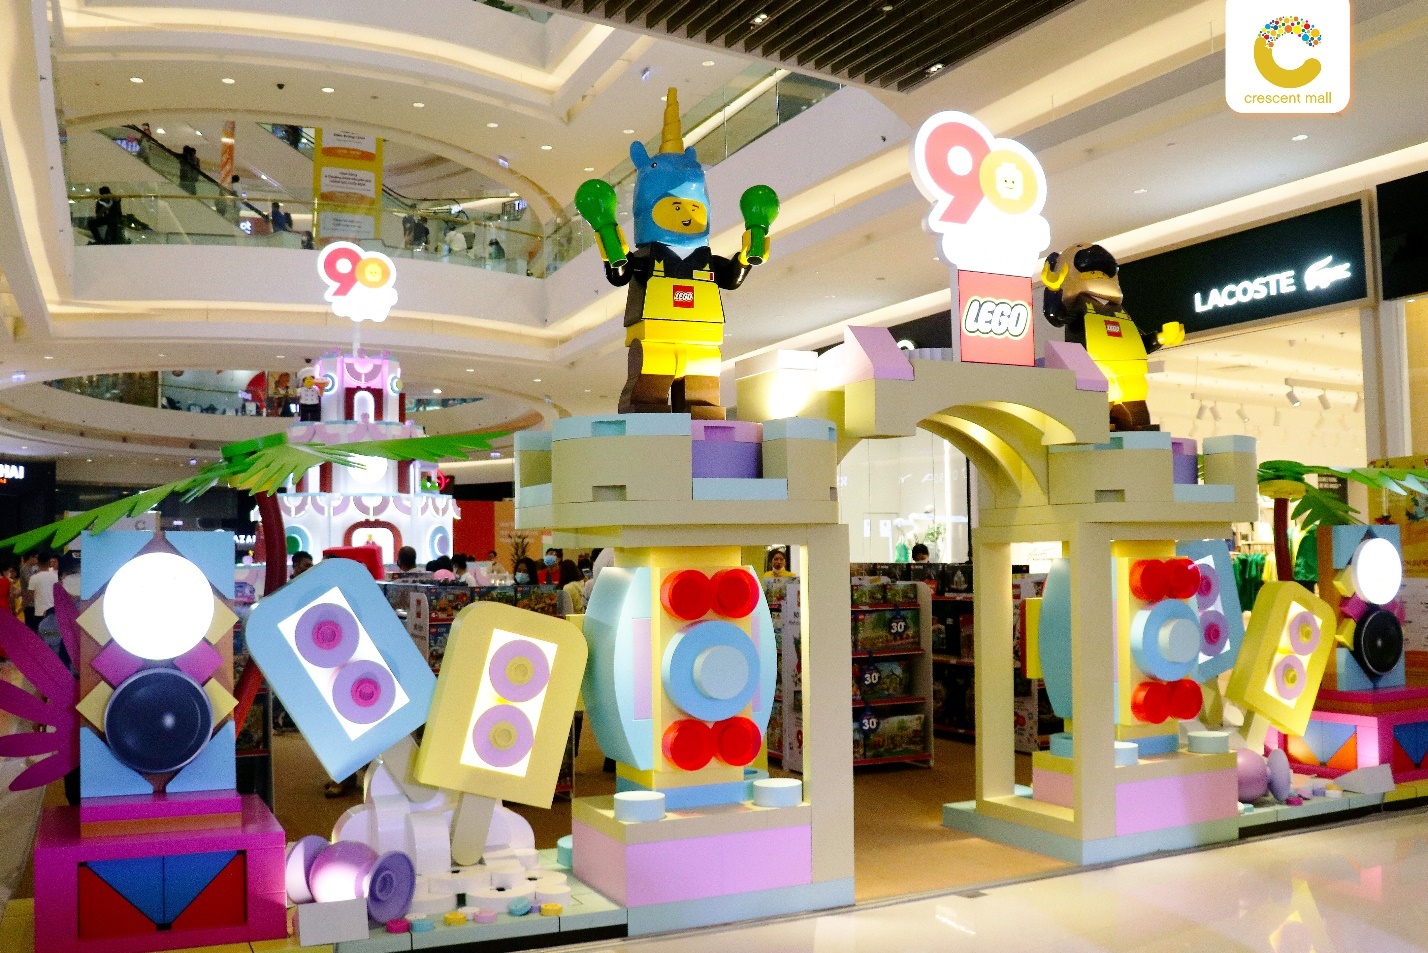 This June, let's step into the creative journey - stir up a summer day at Crescent Mall to celebrate LEGO's 90th birthday - Photo 5.